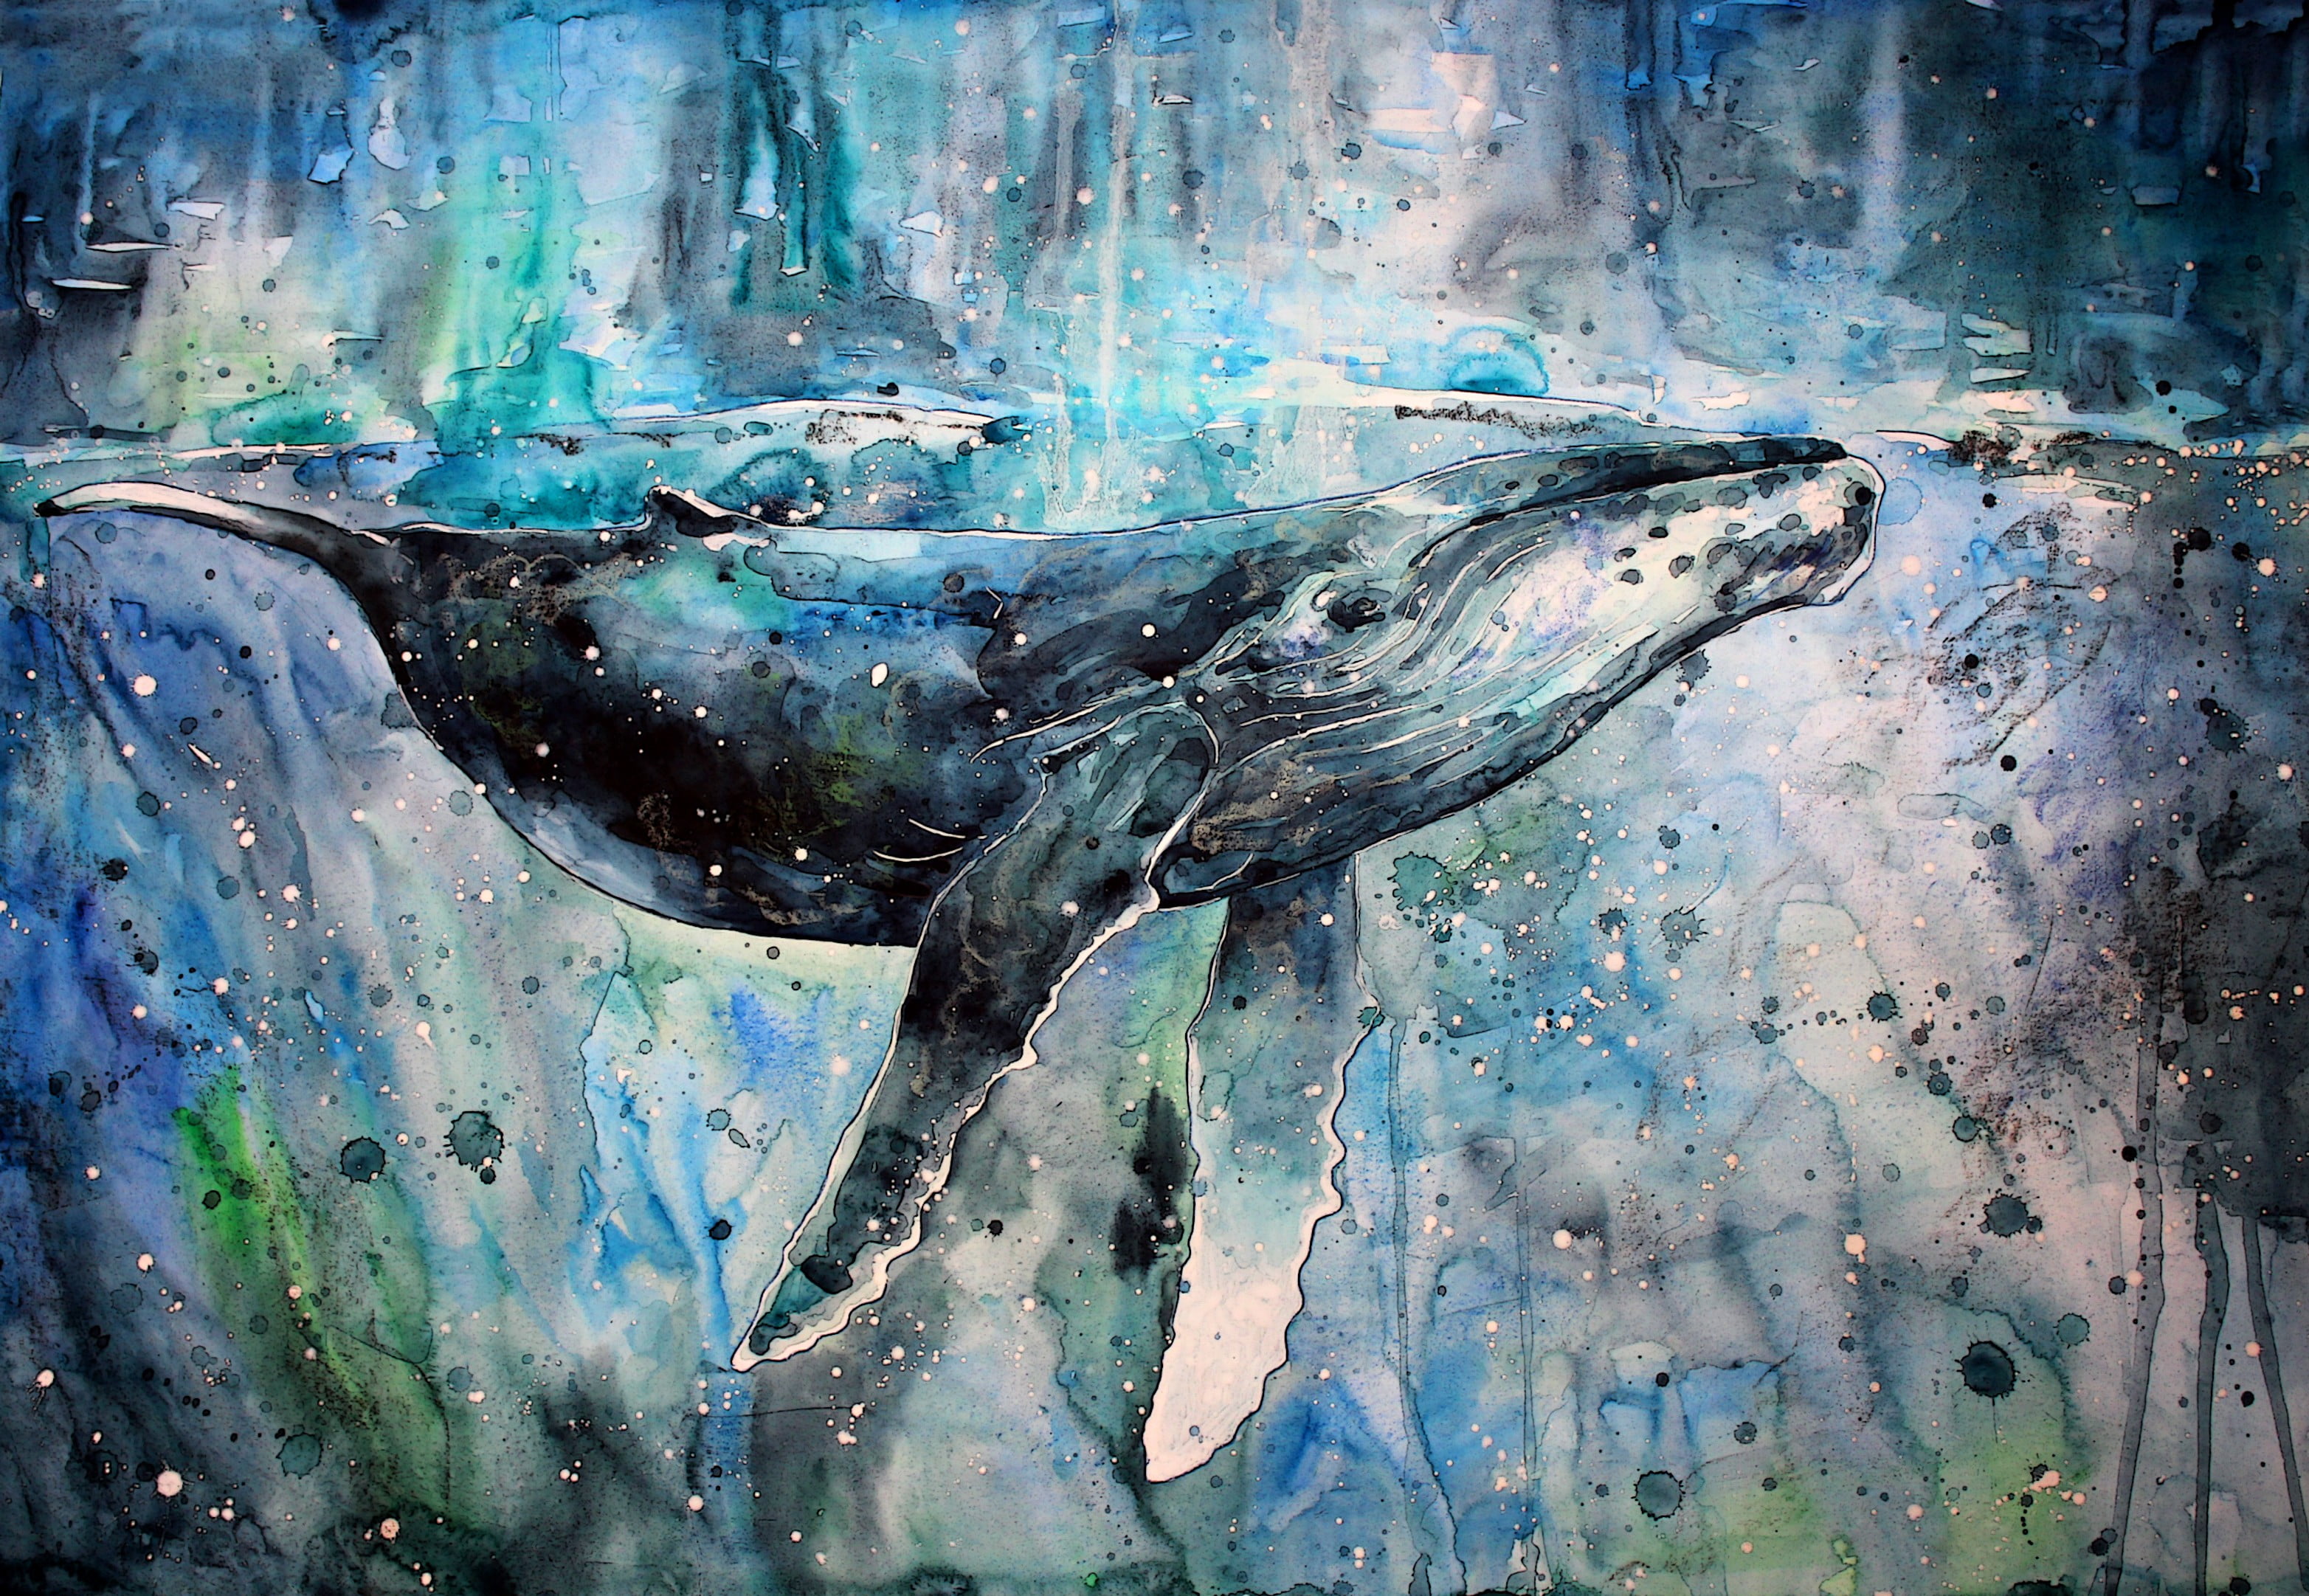 Humpback Whale Blue Whale From A Splash Of Watercolor